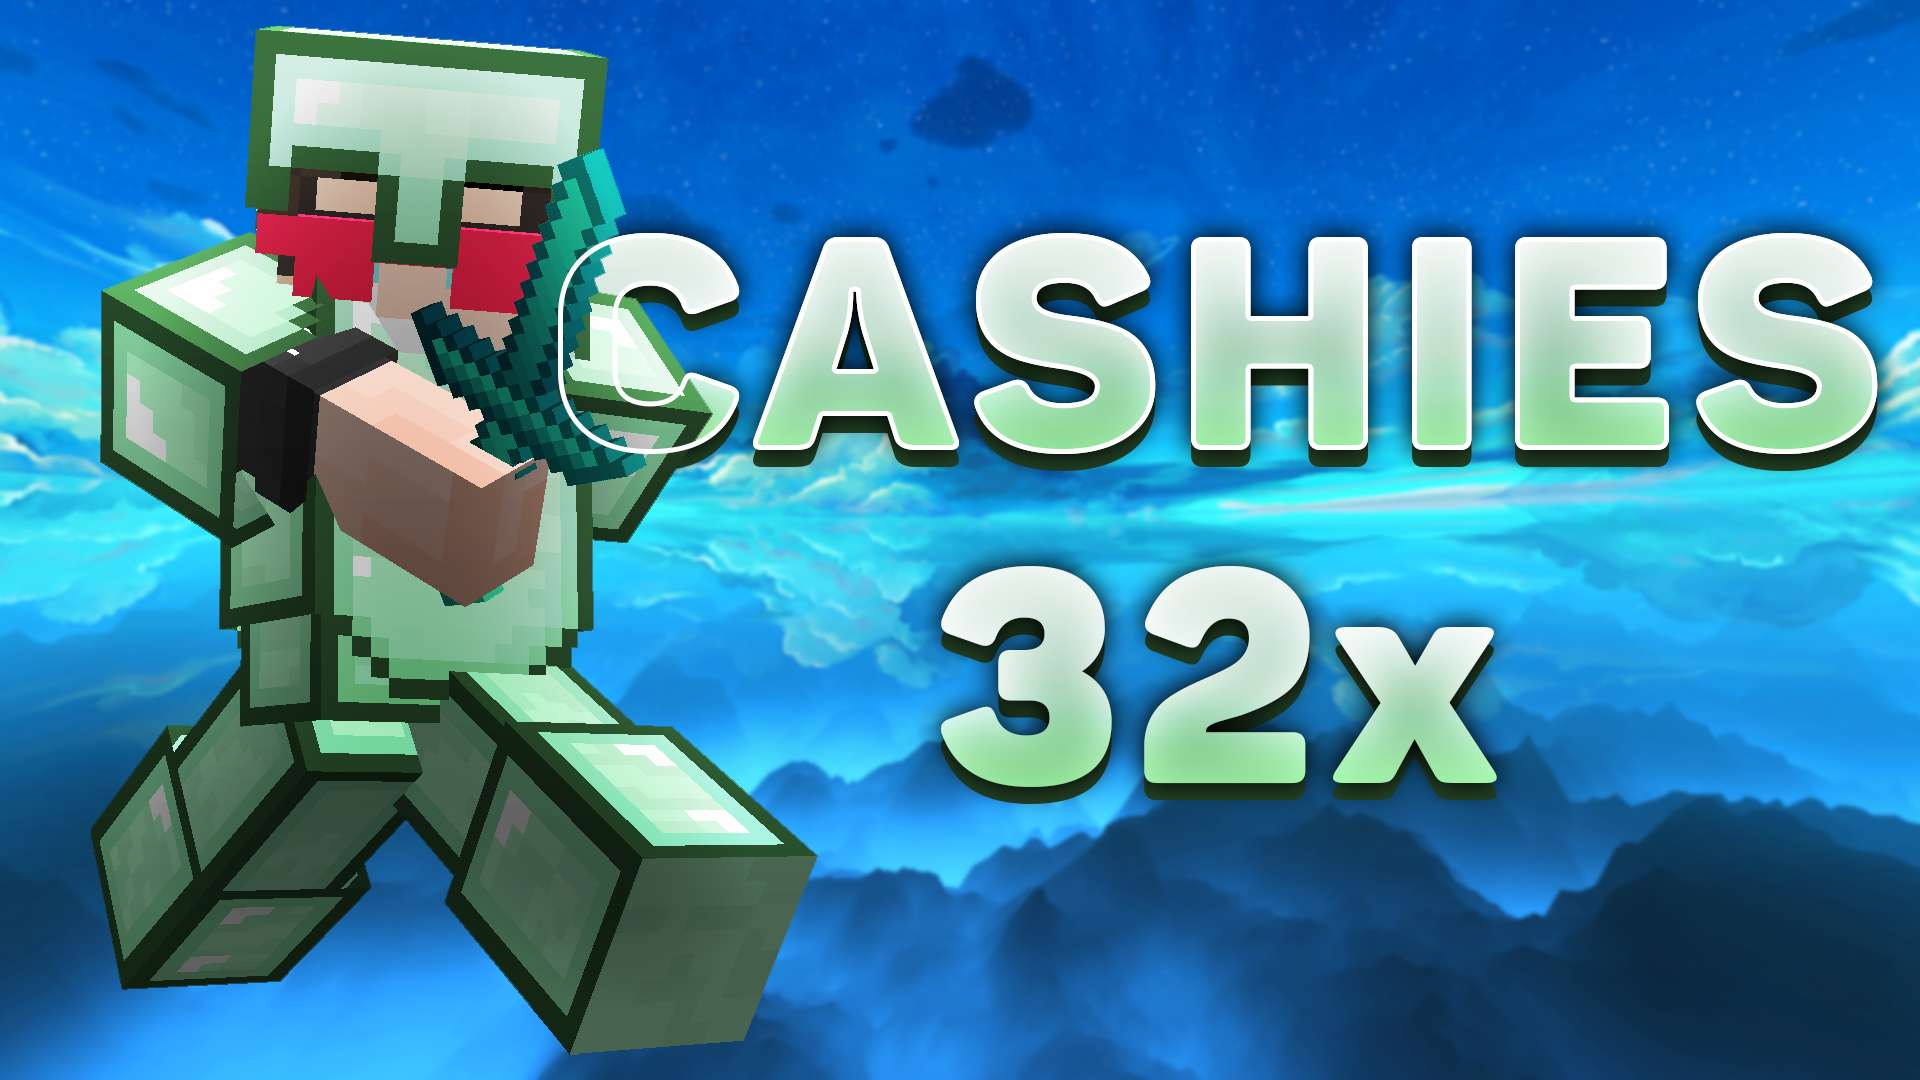 CASHIES 32x by CashLuong on PvPRP